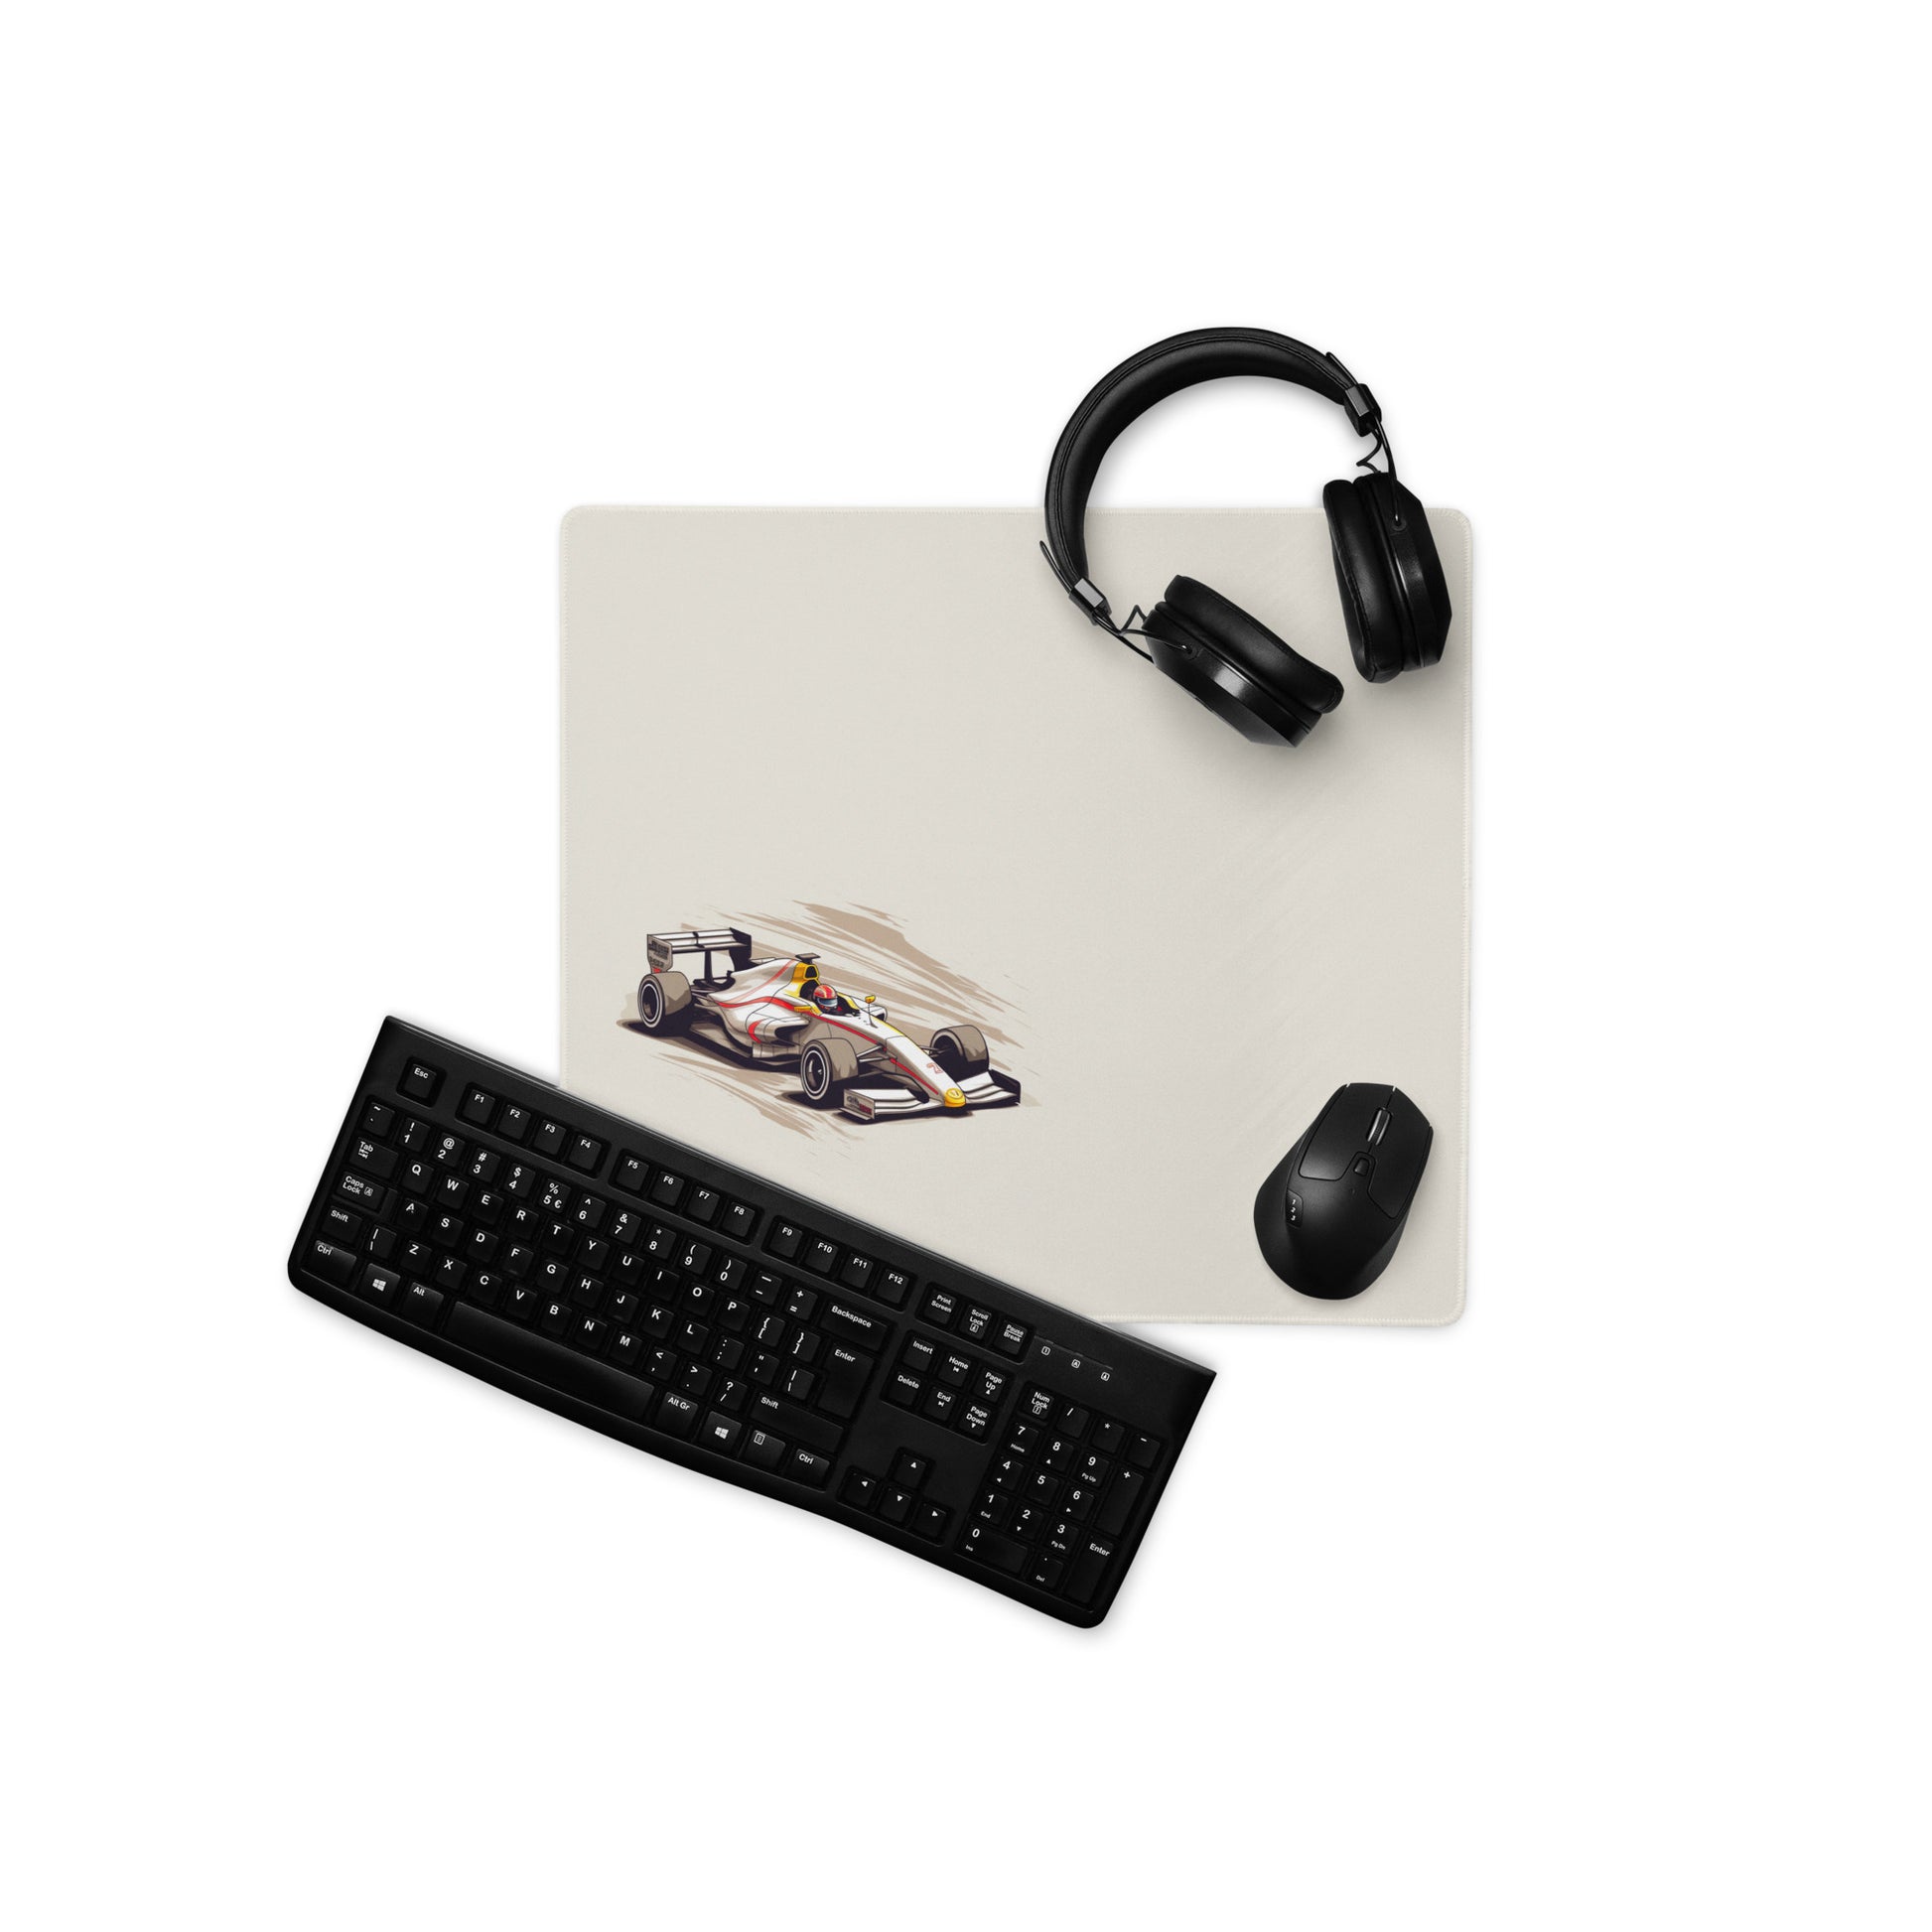 An 18" x 16" mouse pad with a fast formula one car on the left side displayed with headphones, a keyboard and a mouse on it. Beige in color.